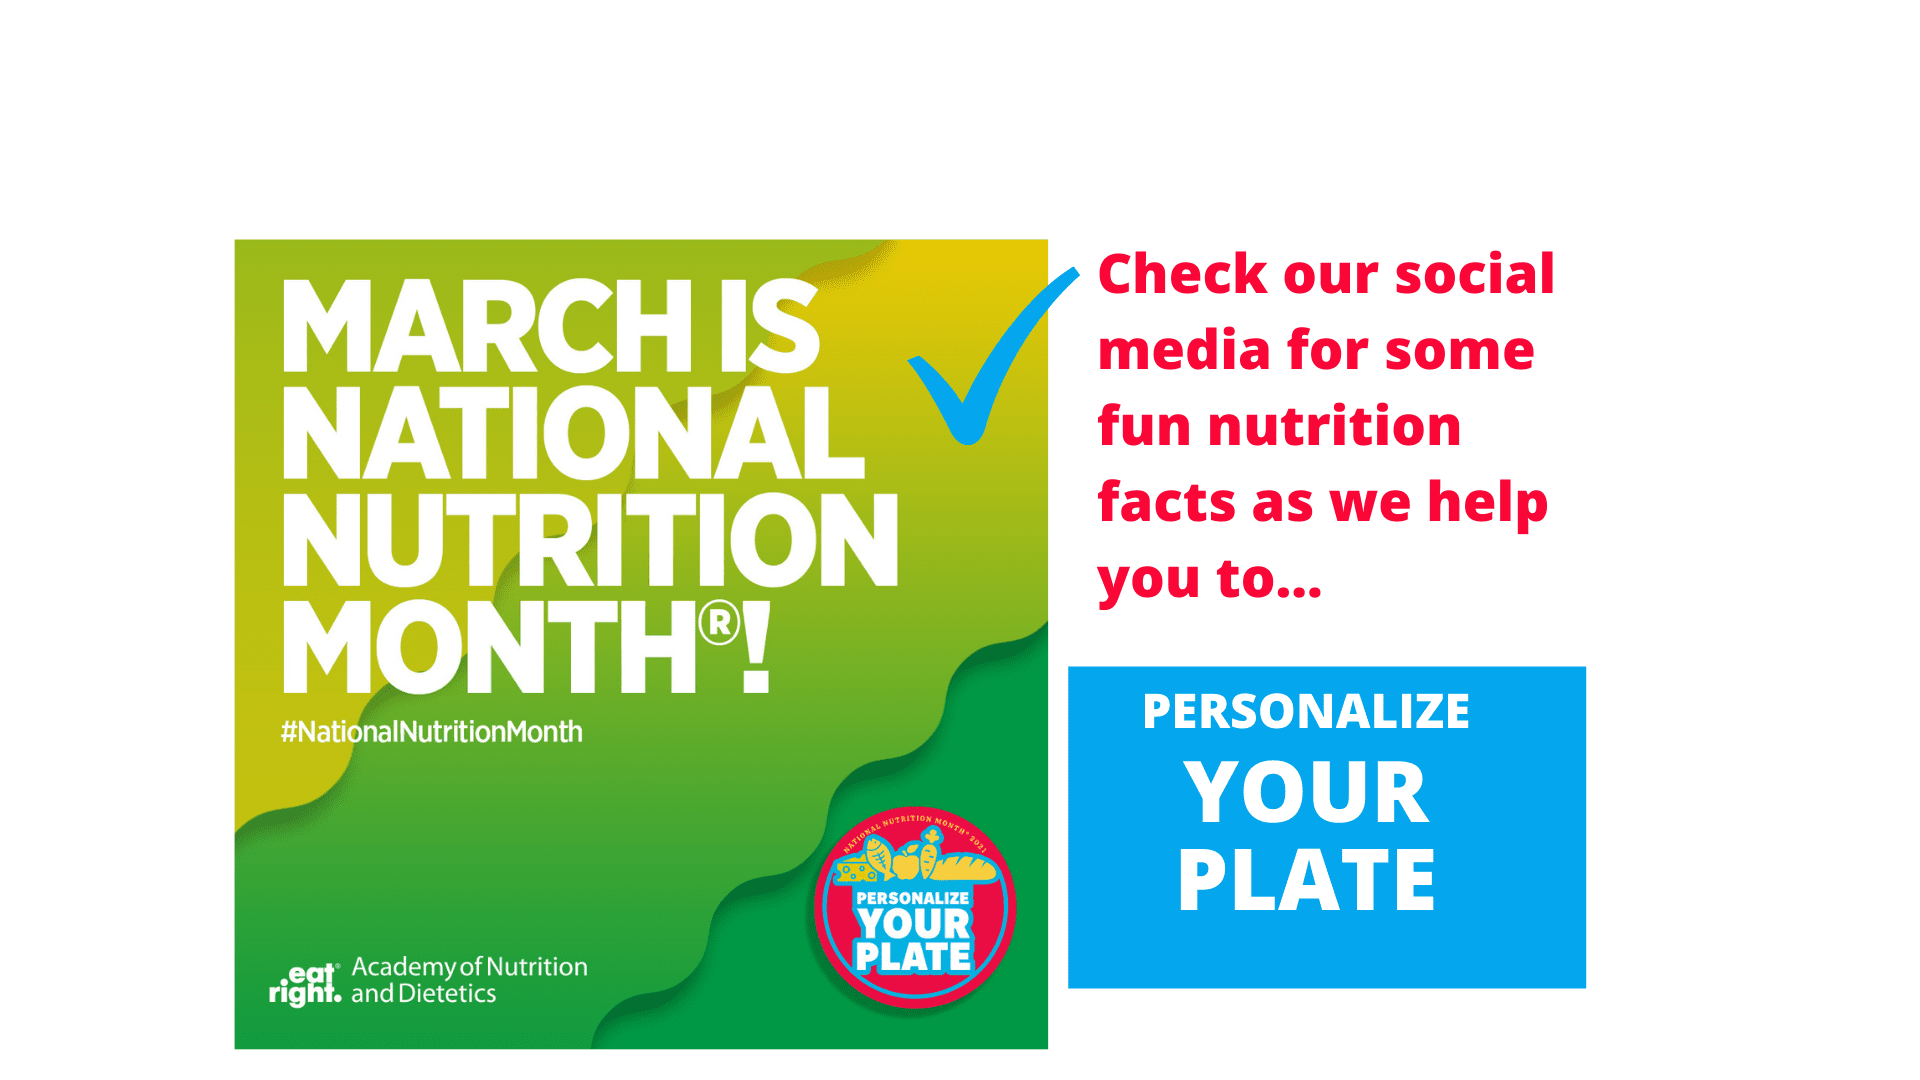 March is National Nutrition Month!